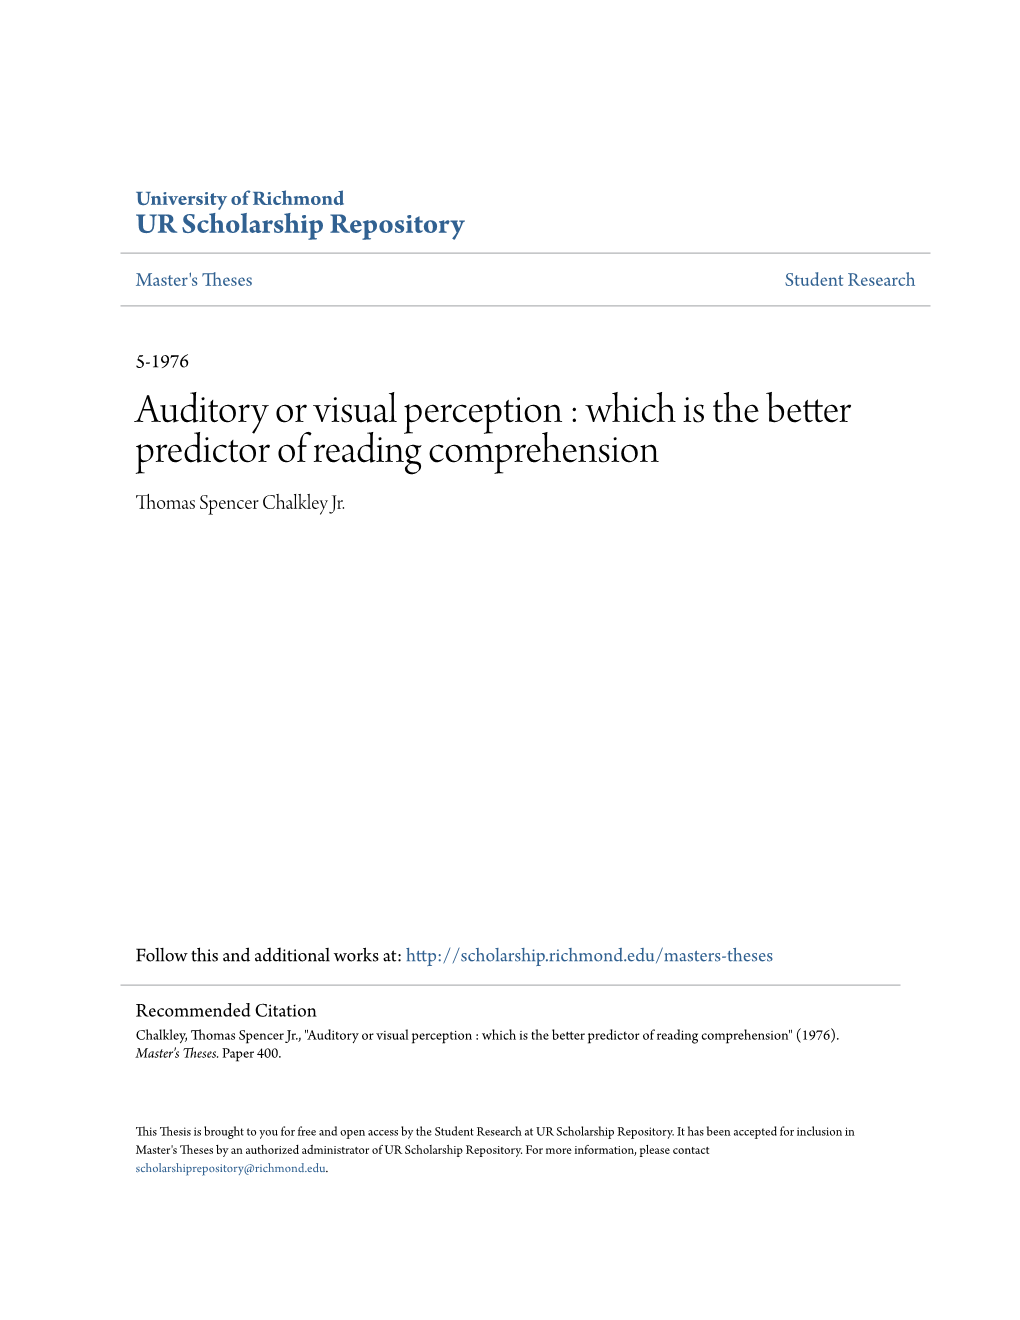 Auditory Or Visual Perception : Which Is the Better Predictor of Reading Comprehension Thomas Spencer Chalkley Jr